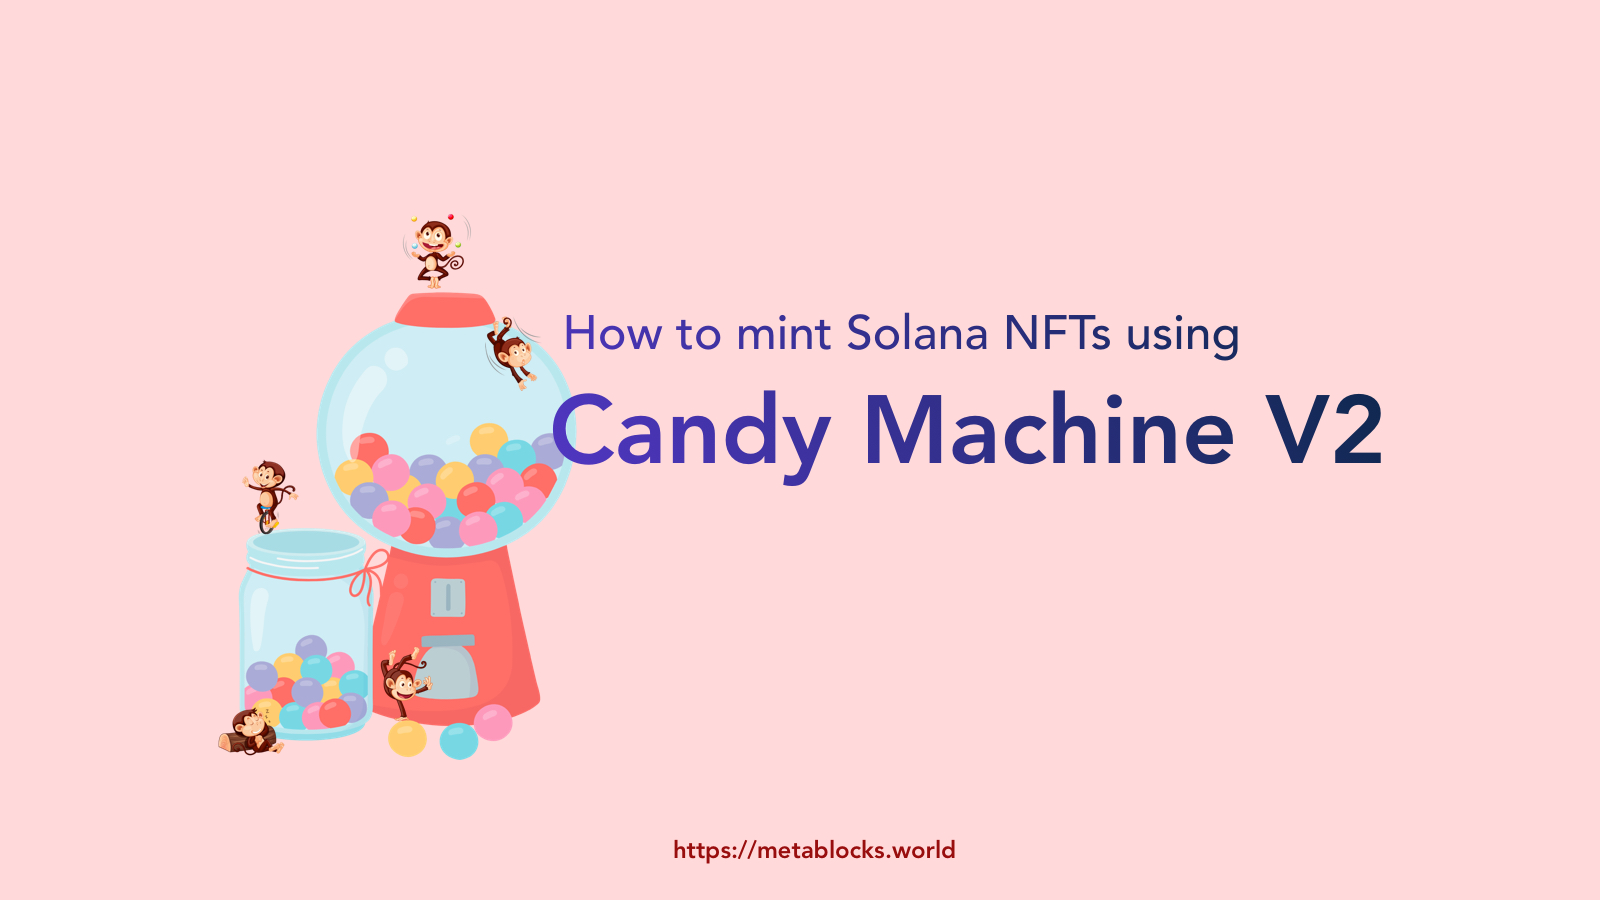 How to mint Solana NFTs using Candy Machine V2 [includes code] - cover image